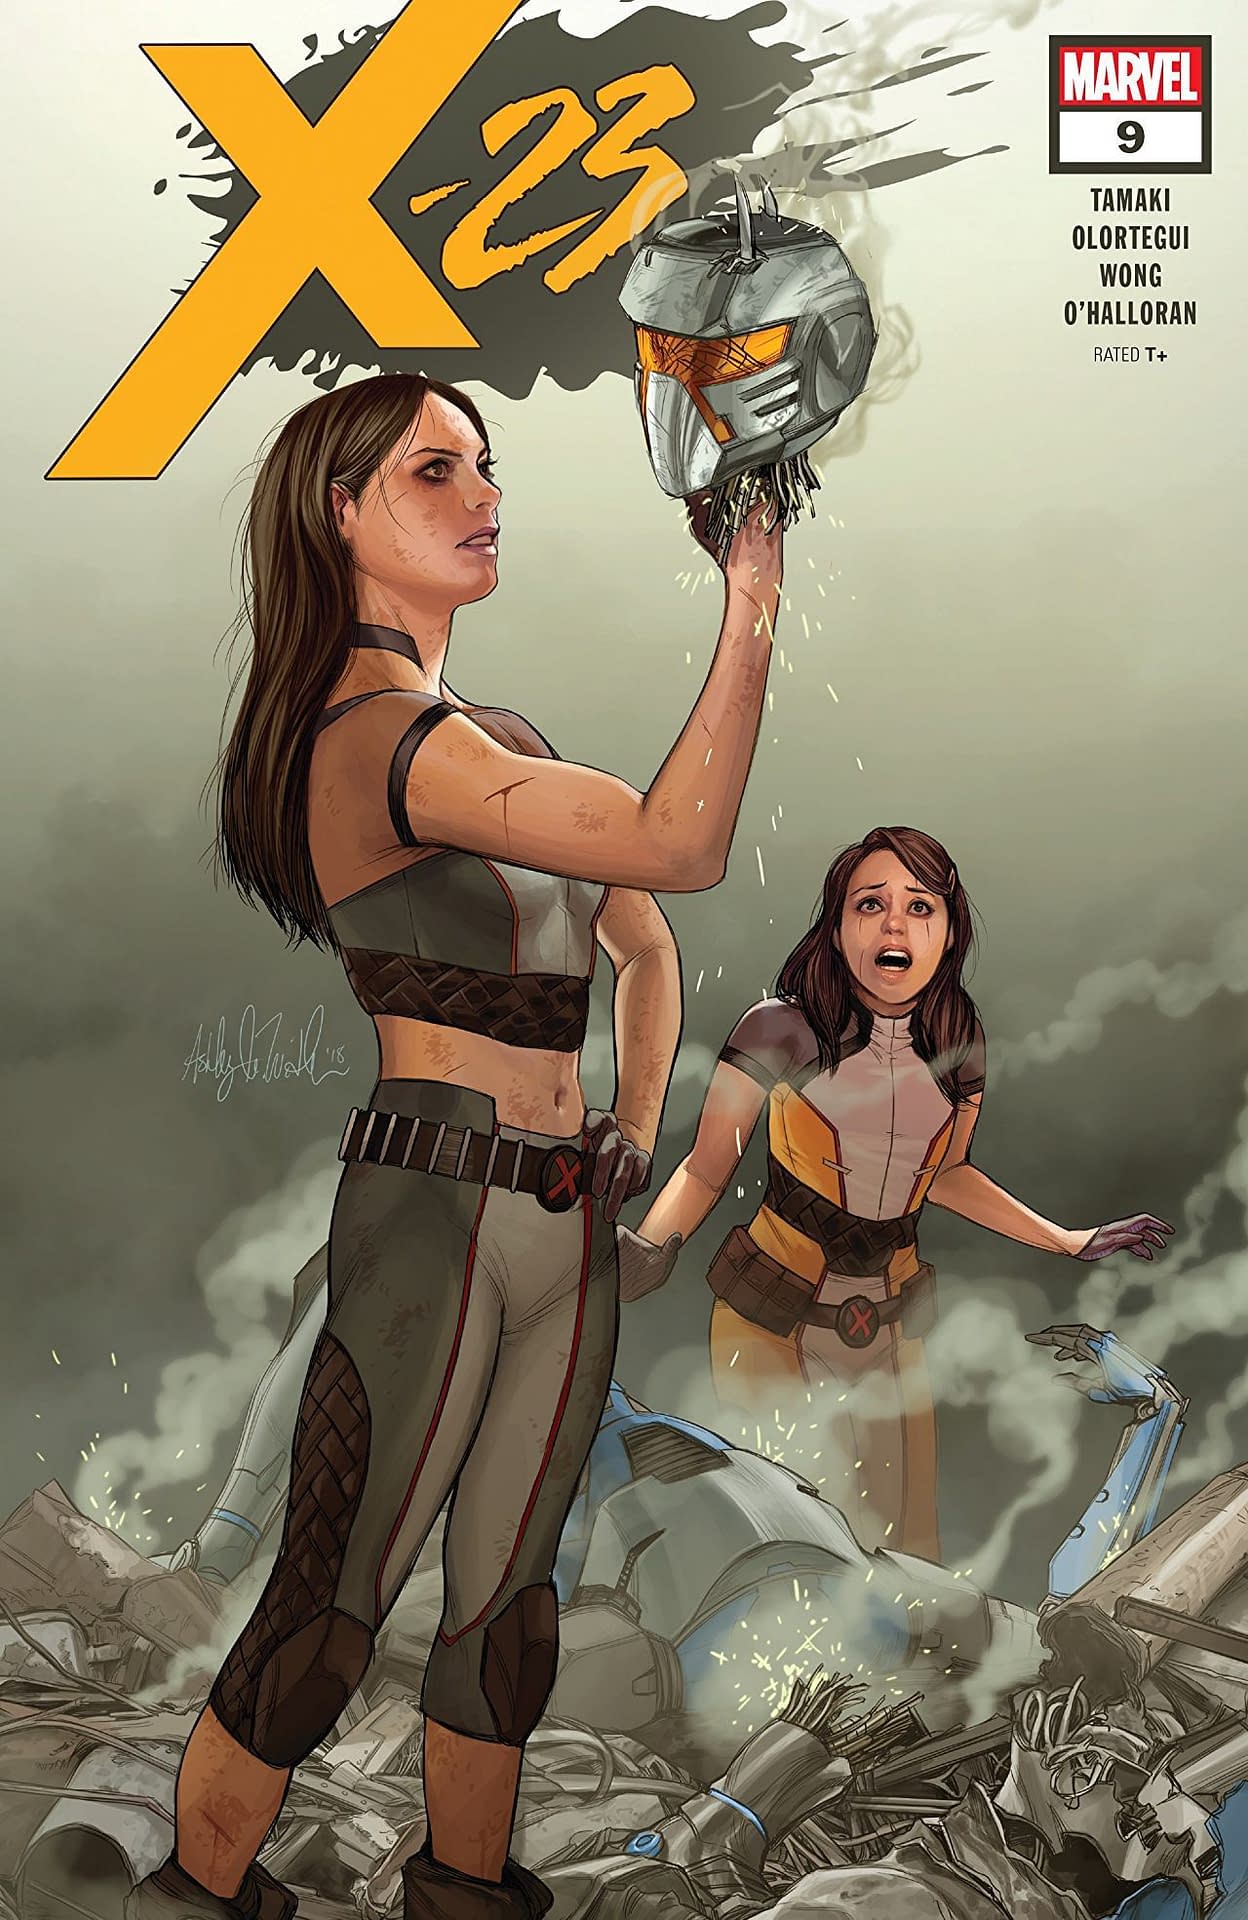 Gabby Gets Her Phone Hacked in Next Week's X-23 #9